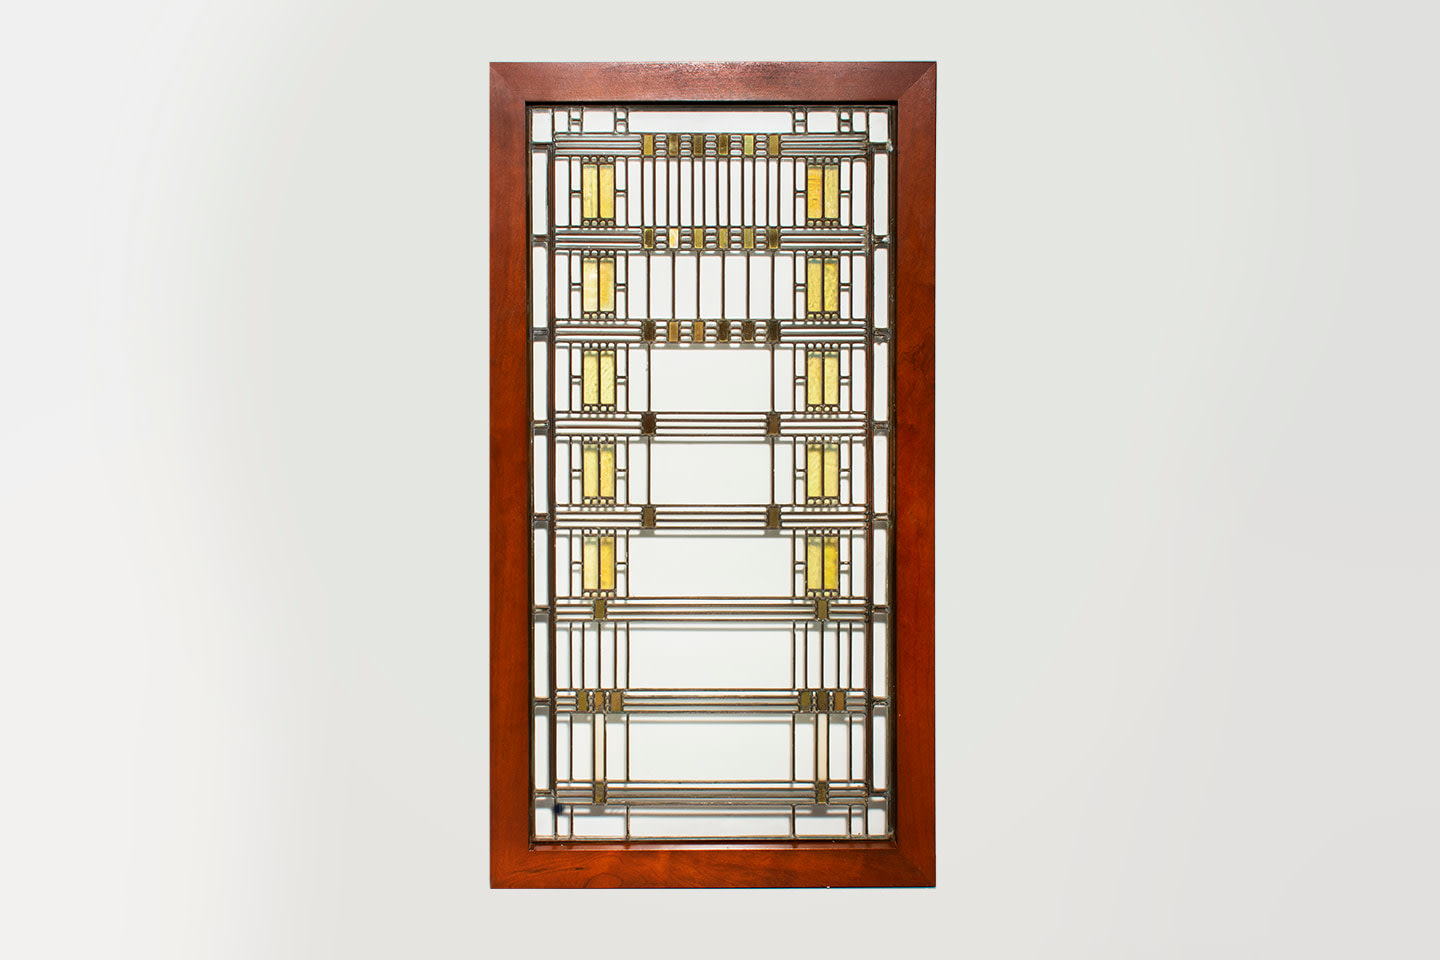 A leaded glass window in the Prairie style by Frank Lloyd Wright, the vertical rectangular window depicting rectilinear stylized depiction of wisteria panicles in iridescent yellow glass against a clear background allowing you to see through the panel